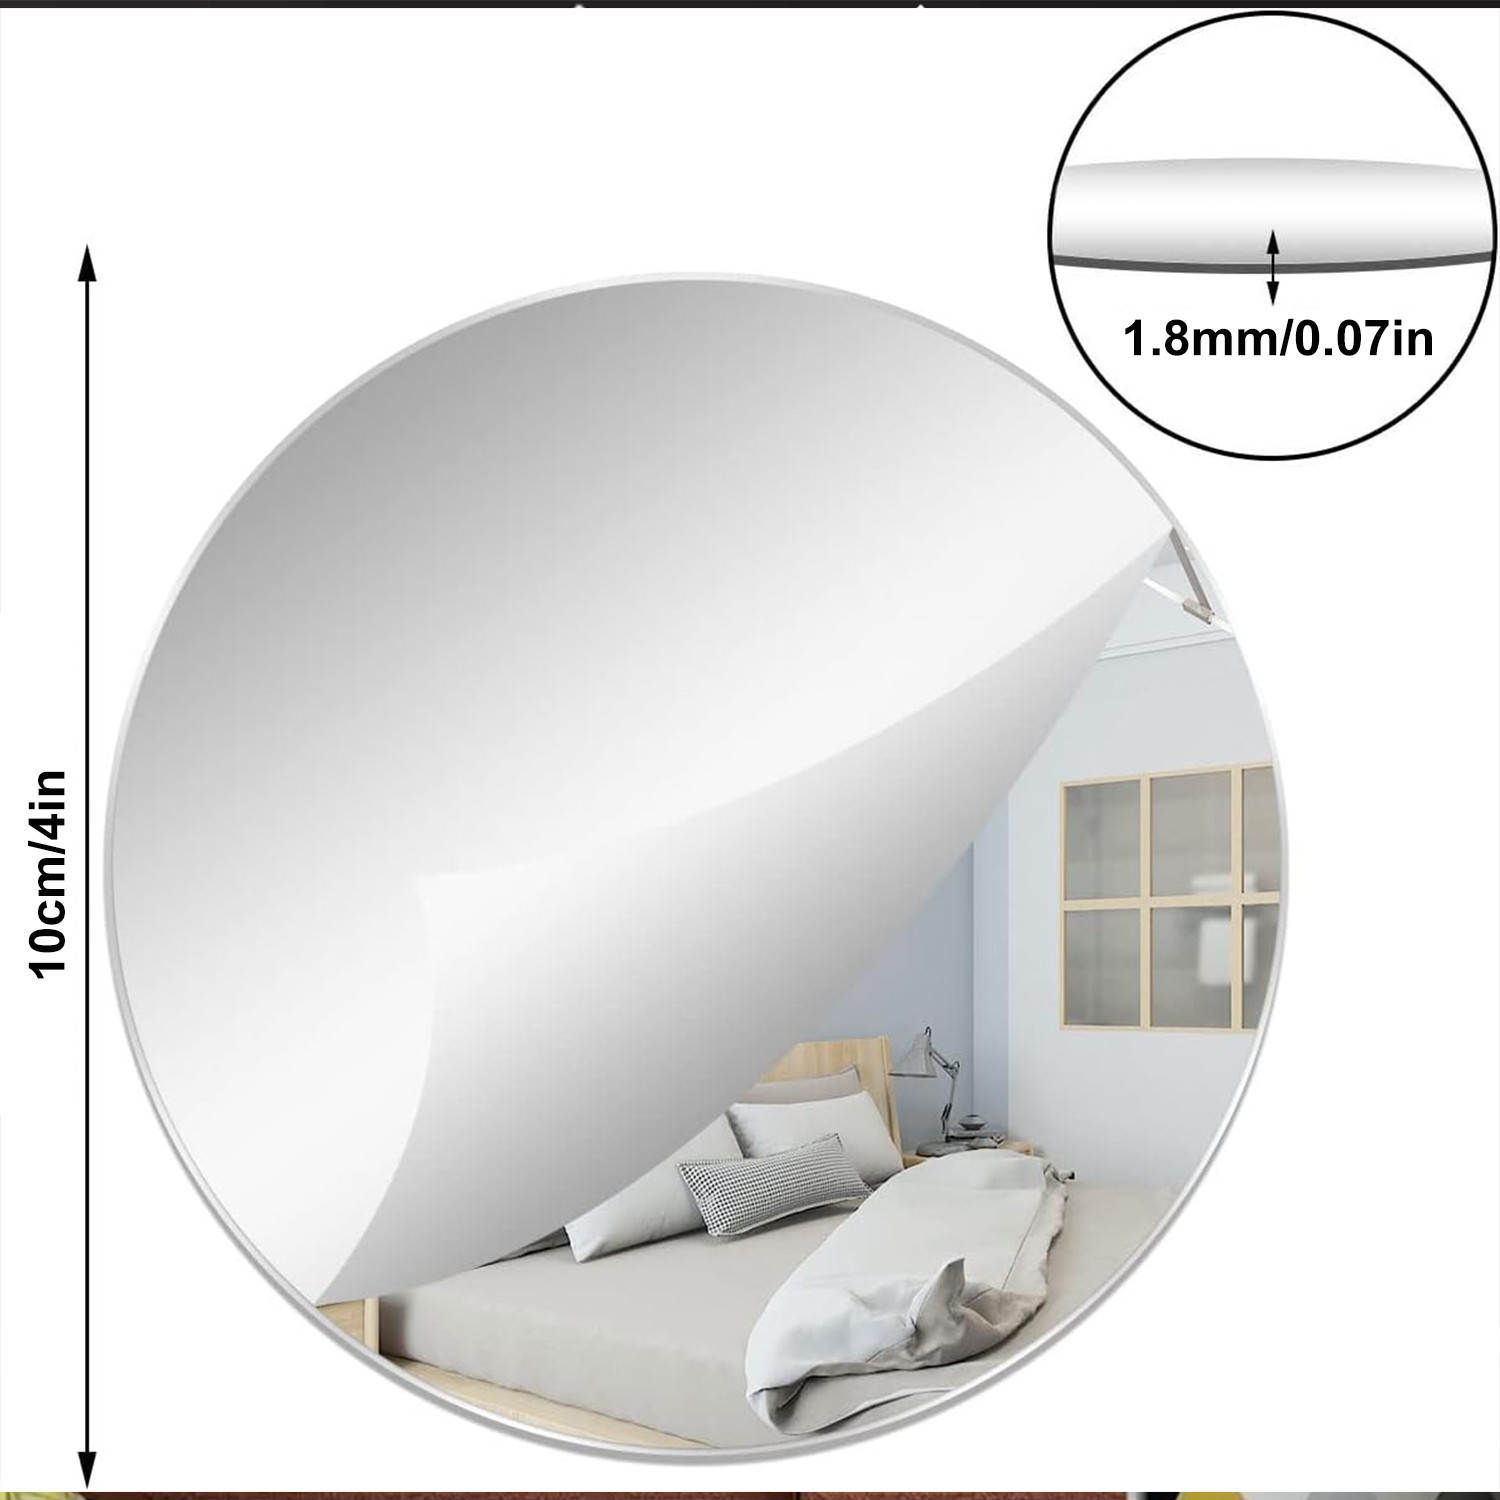 Kuber Industries Self Adhesive Mirror Stickers For Wall|Round Wall Mirror Stickers|Flexible Mirror For Wall Décor, Living Room|Premium Acrylic Material 